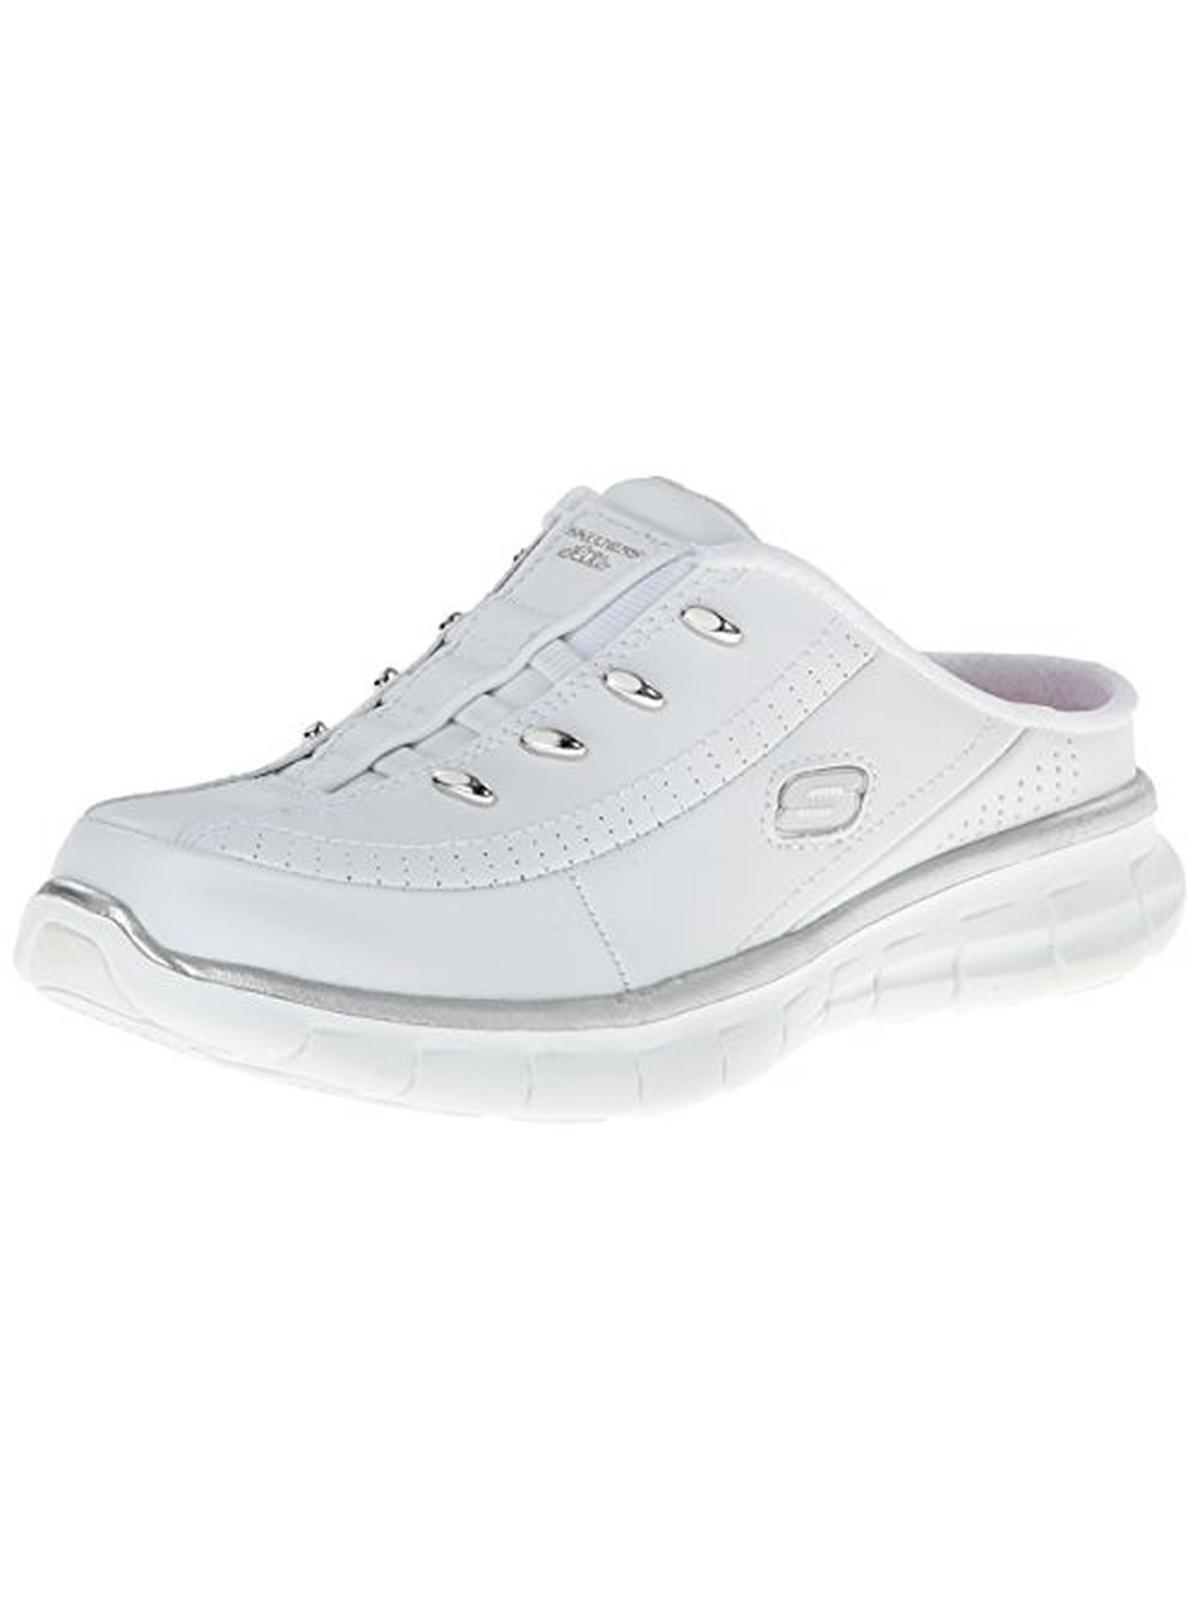 Skechers Synergy-elite Glam Leather Memory Foam Fashion Sneakers in White |  Lyst